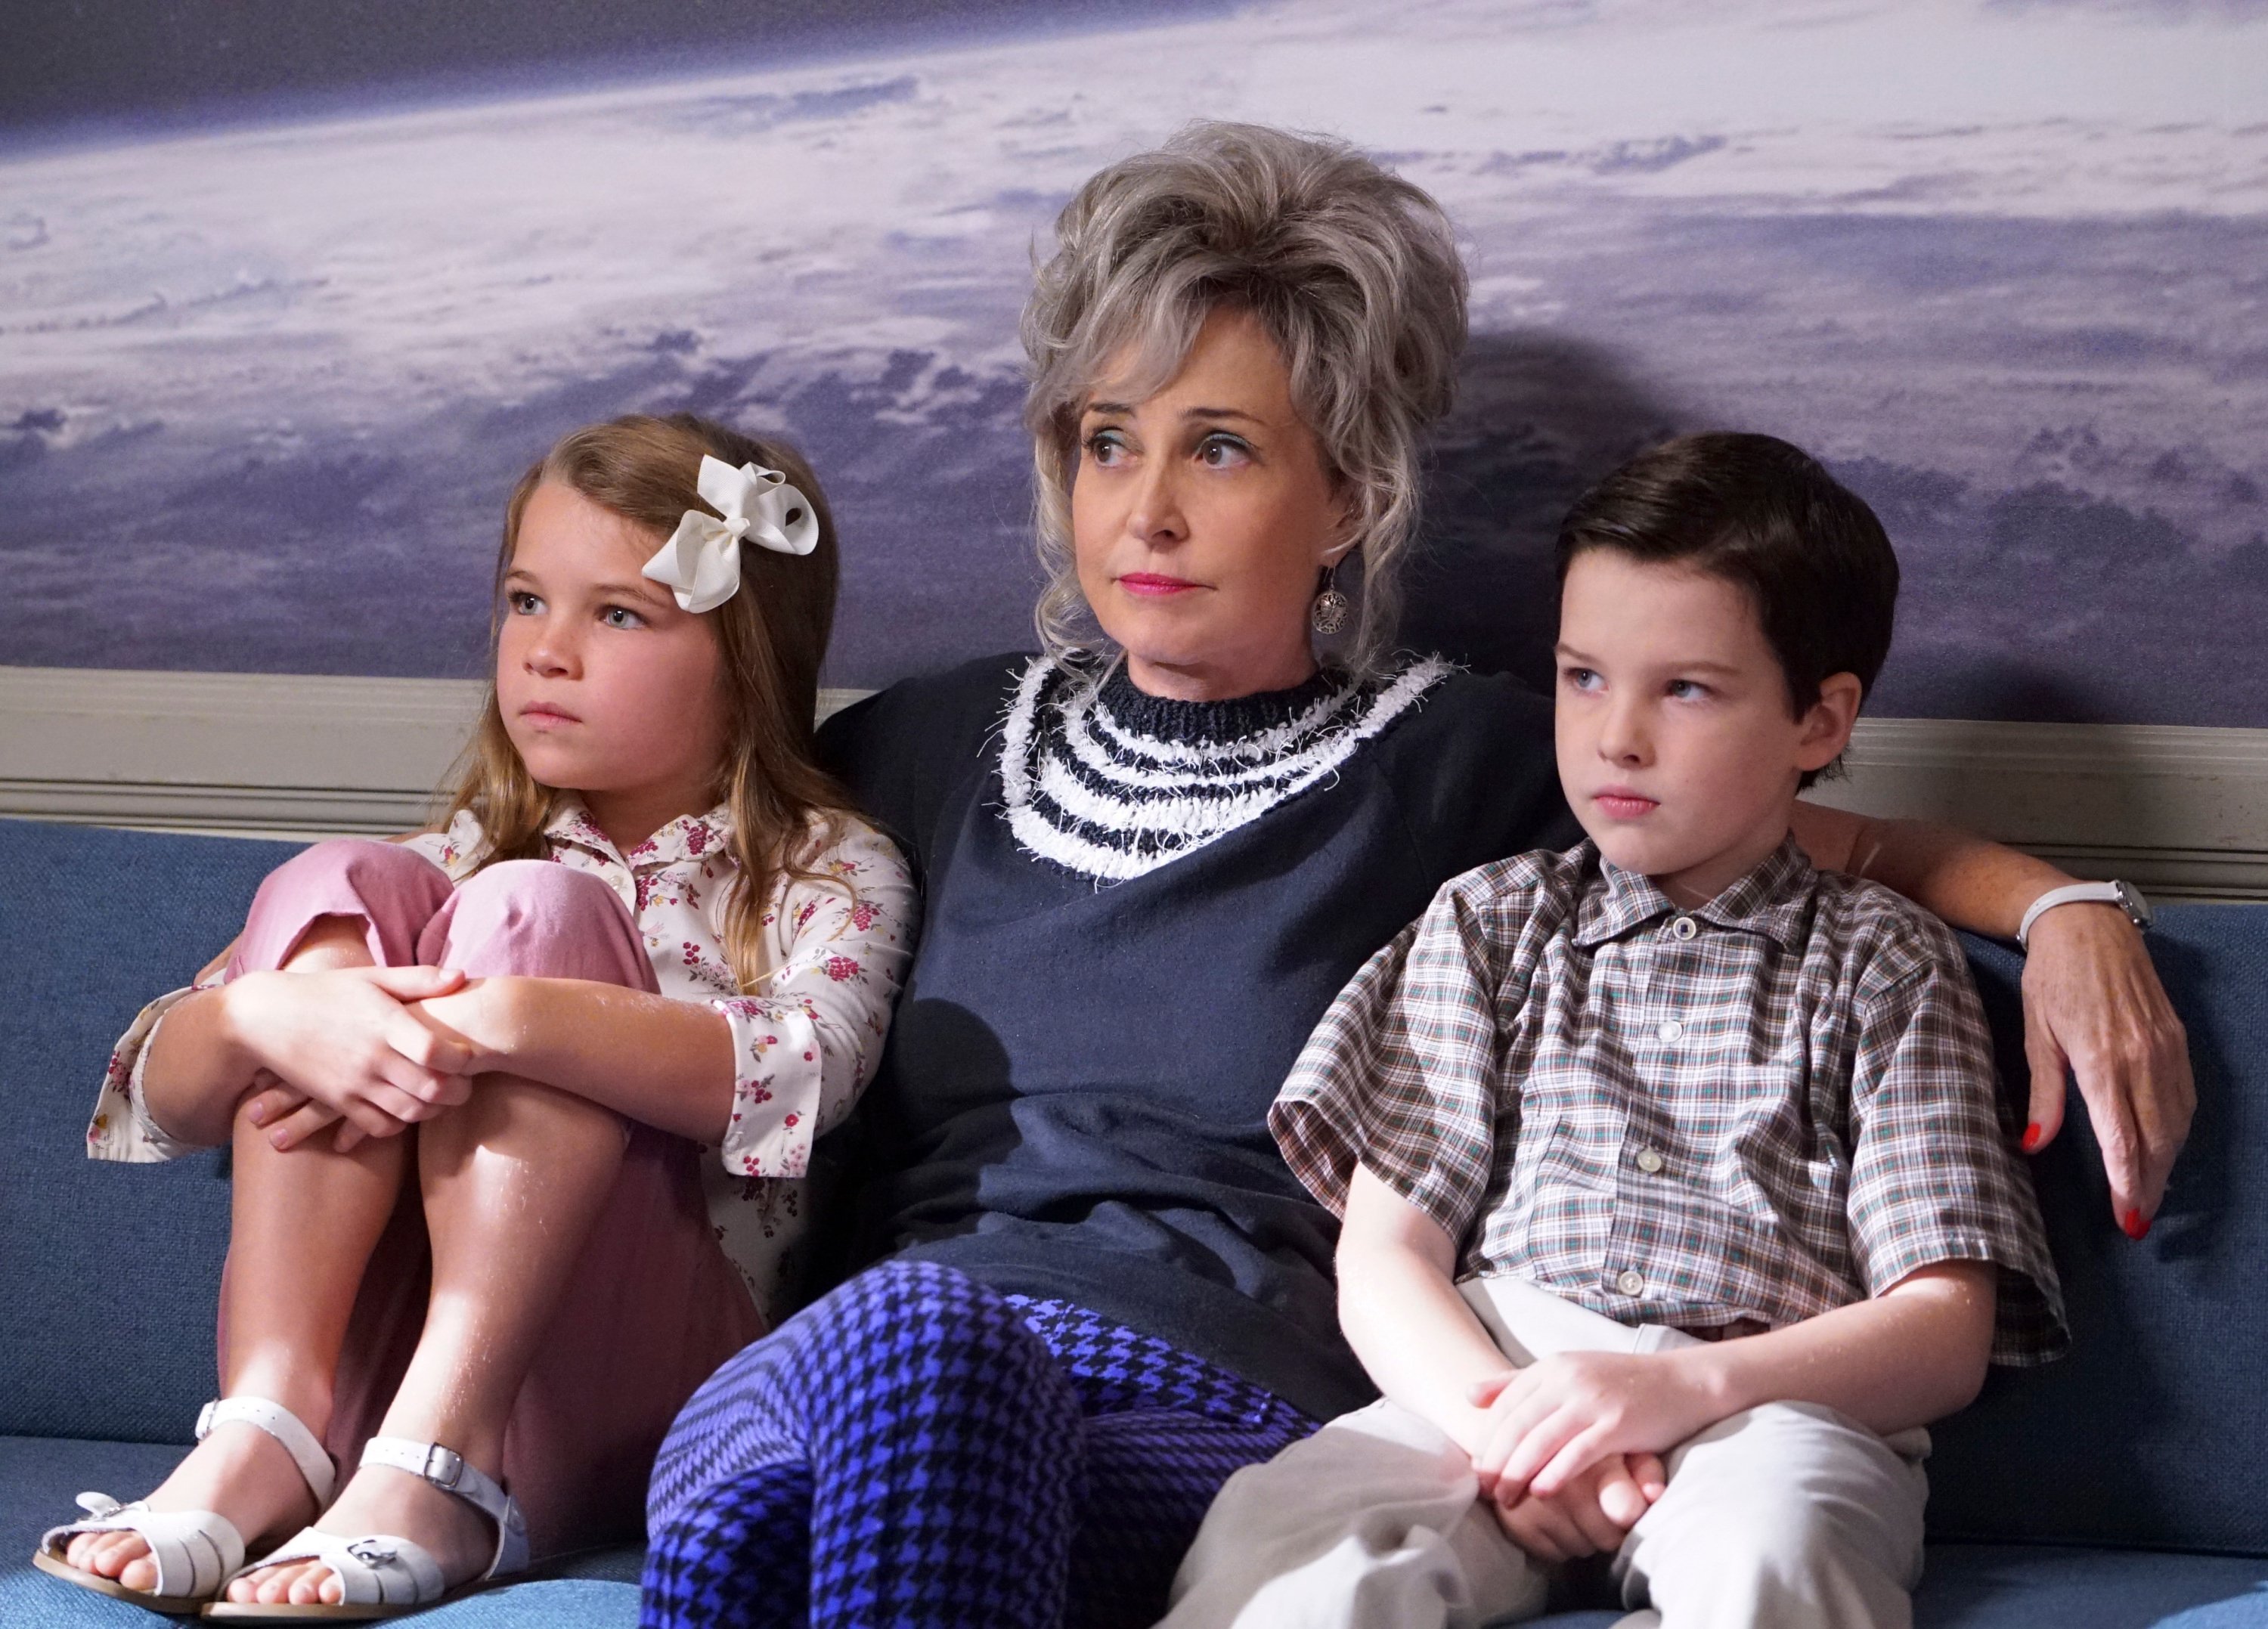 Missy Cooper, Meemaw and Sheldon Cooper sit in an office together during an episode of 'Young Sheldon'